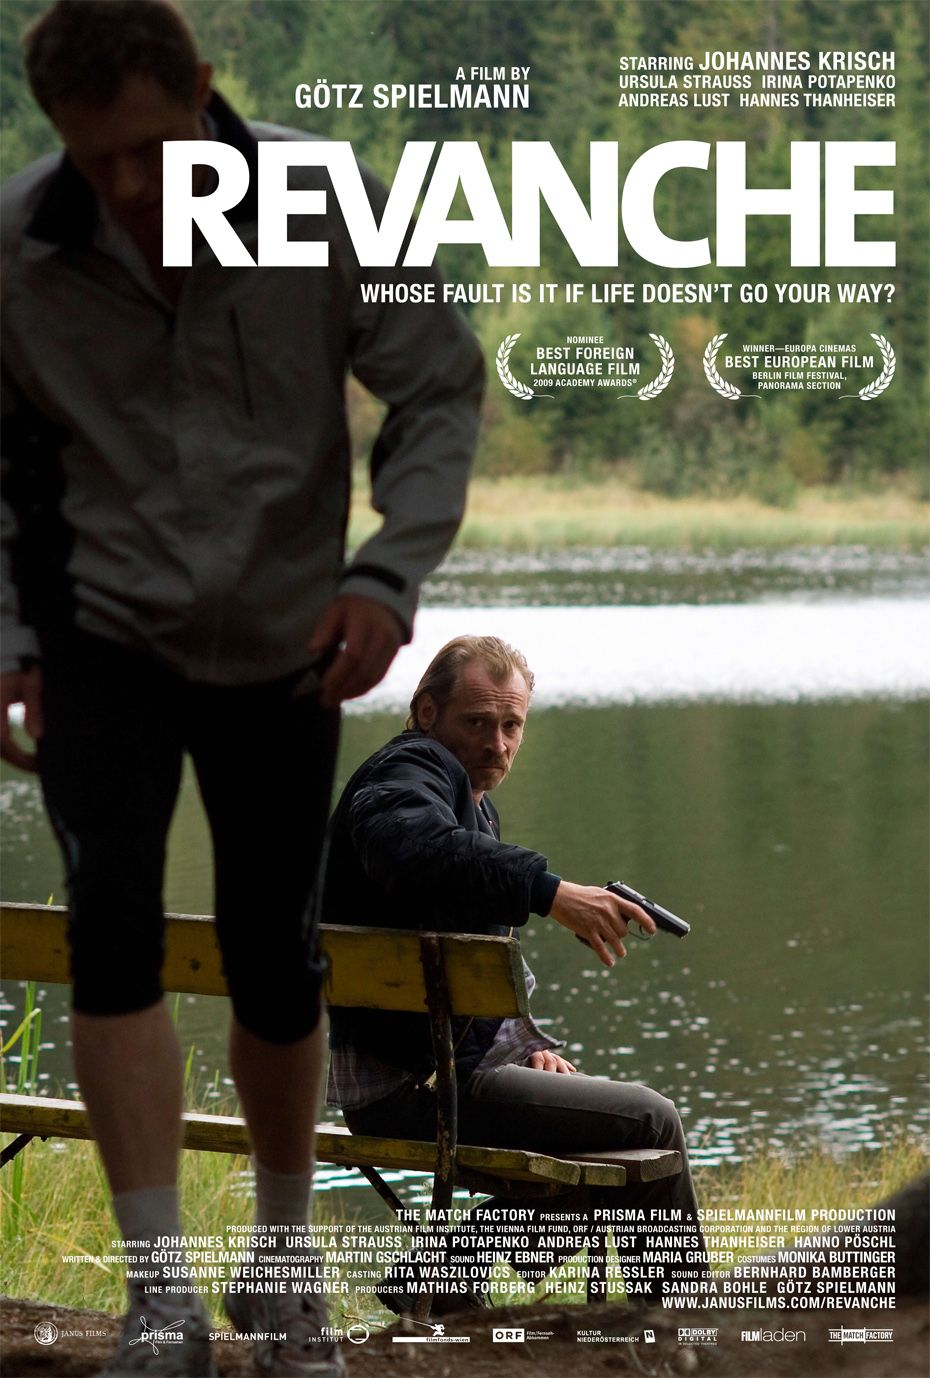 A movie poster for Revanche